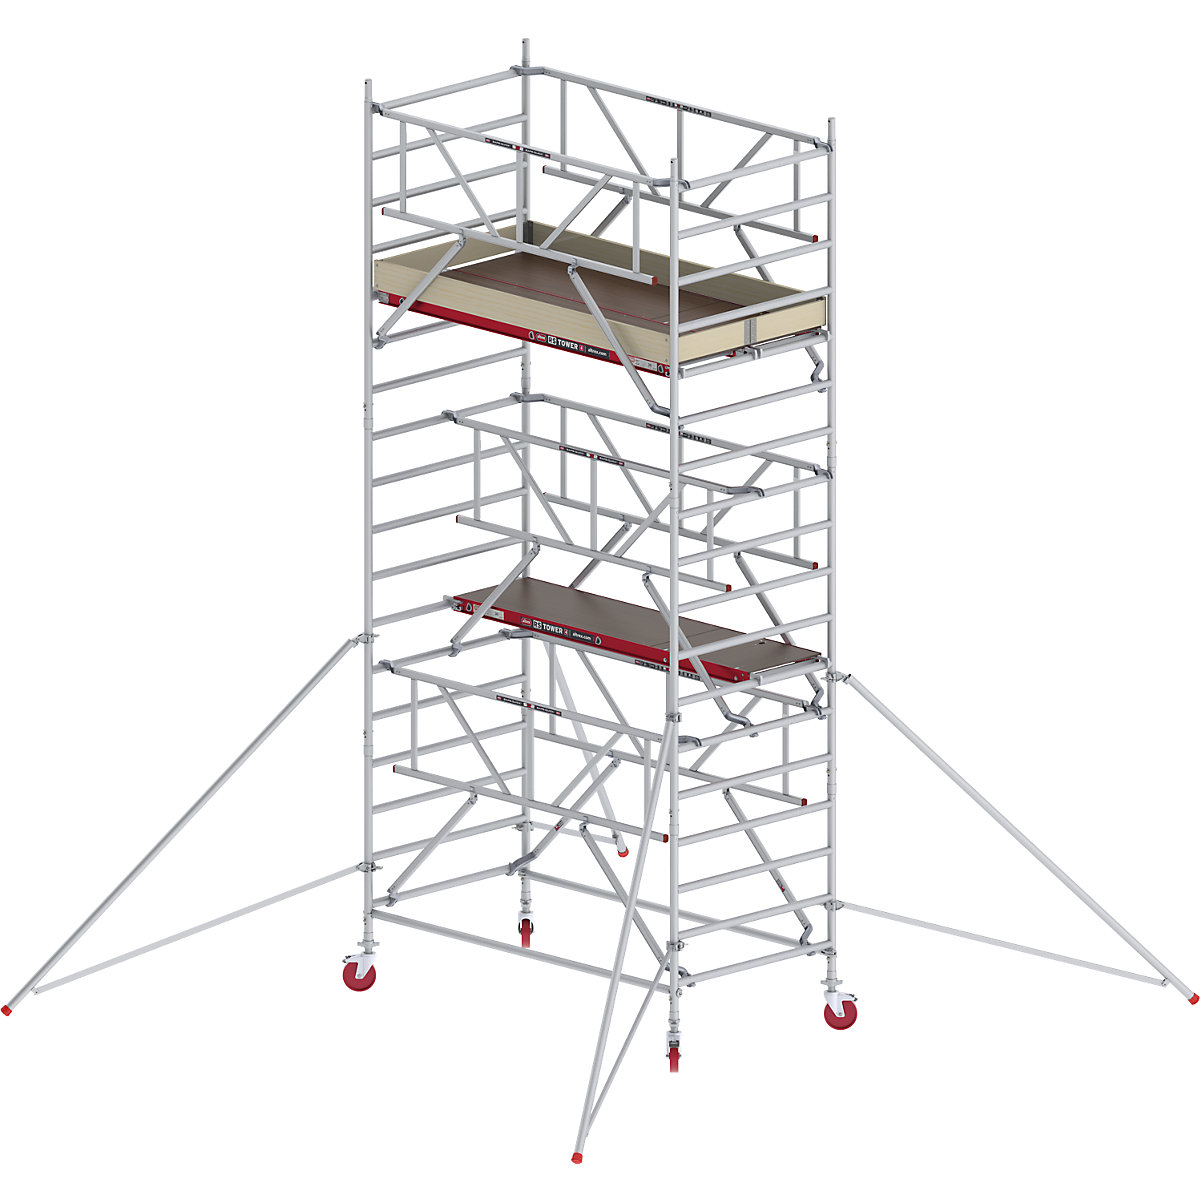 RS TOWER 42 wide mobile access tower with Safe-Quick® – Altrex, wooden platform, length 2.45 m, working height 6.20 m-10